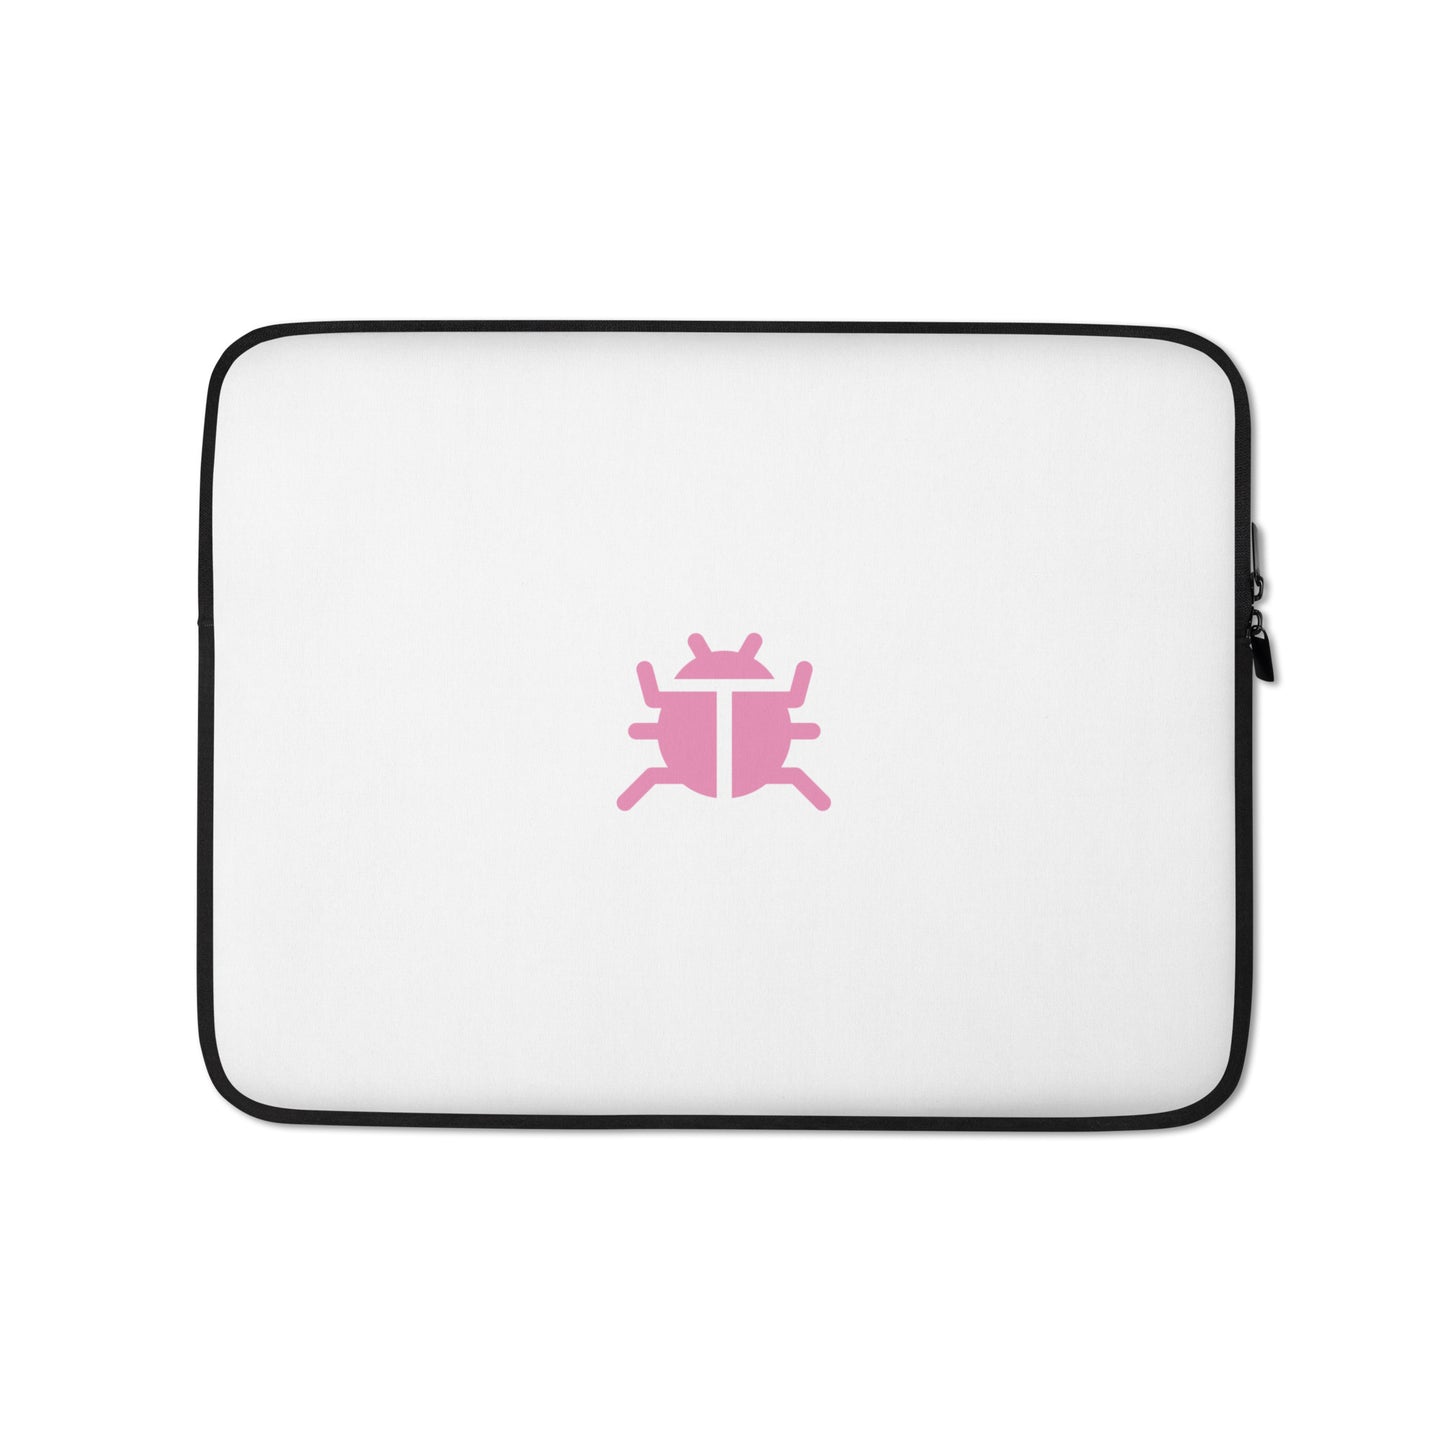 Laptop case with bug